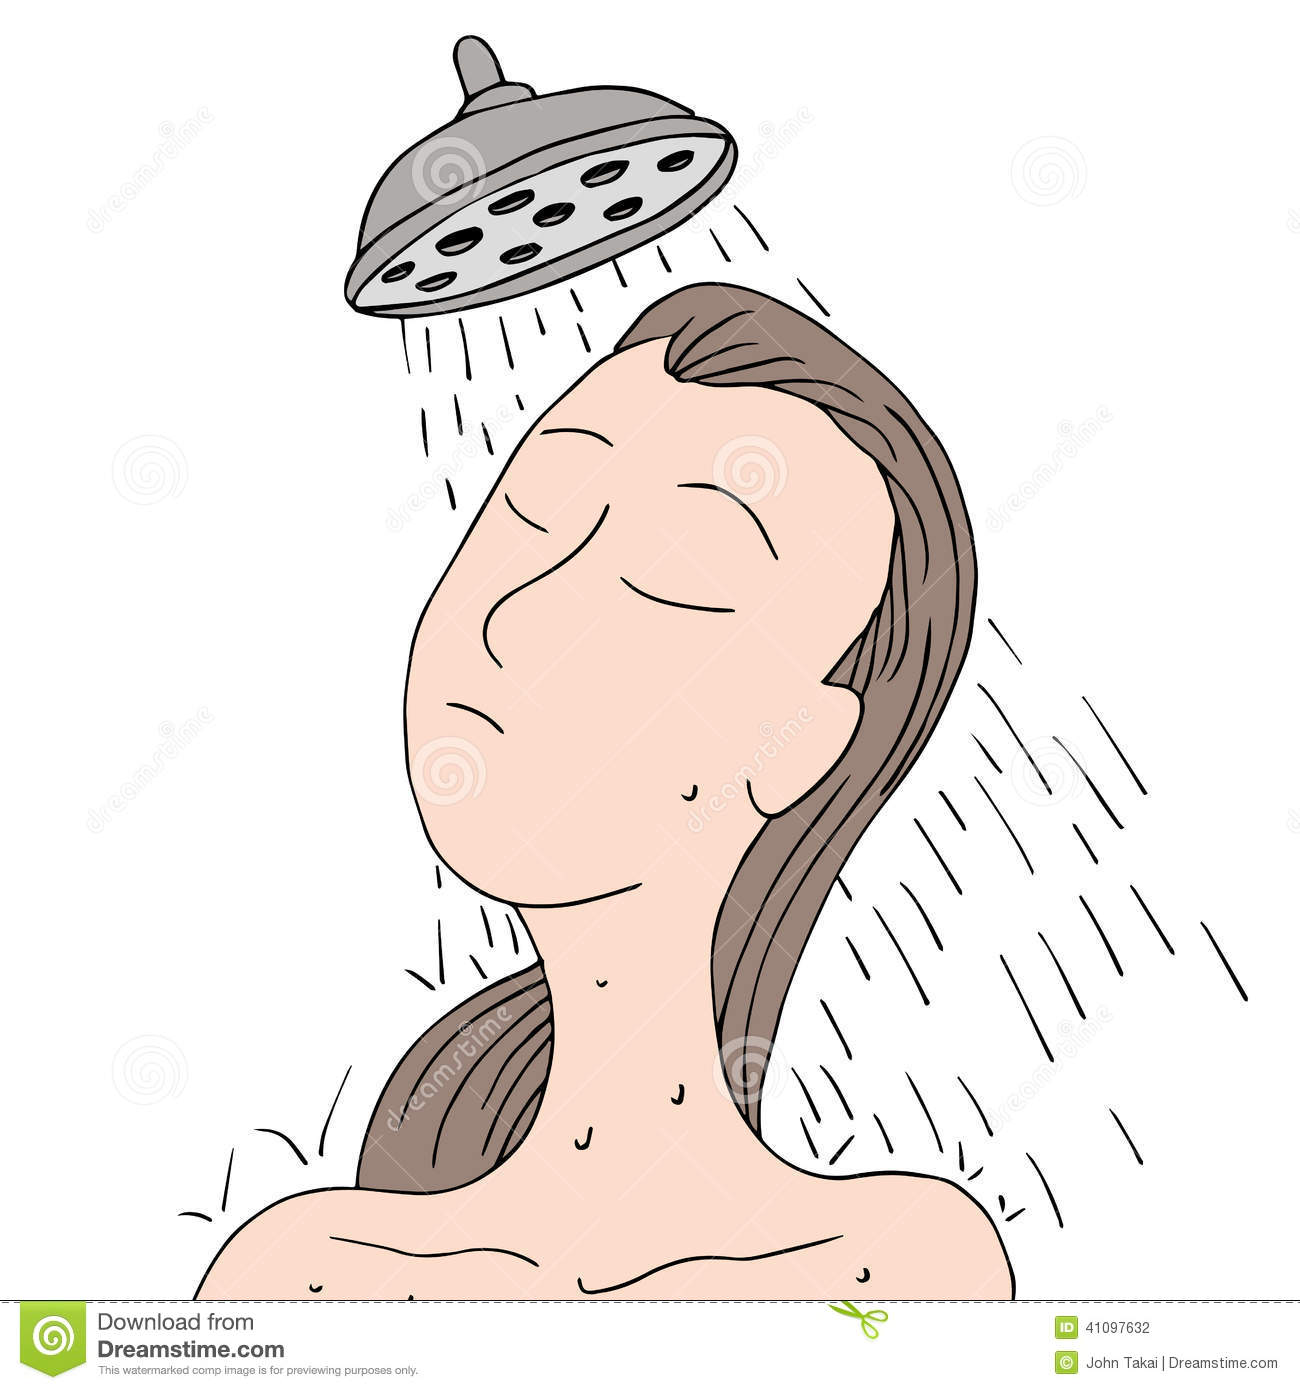 clipart of woman taking a shower - Clipground